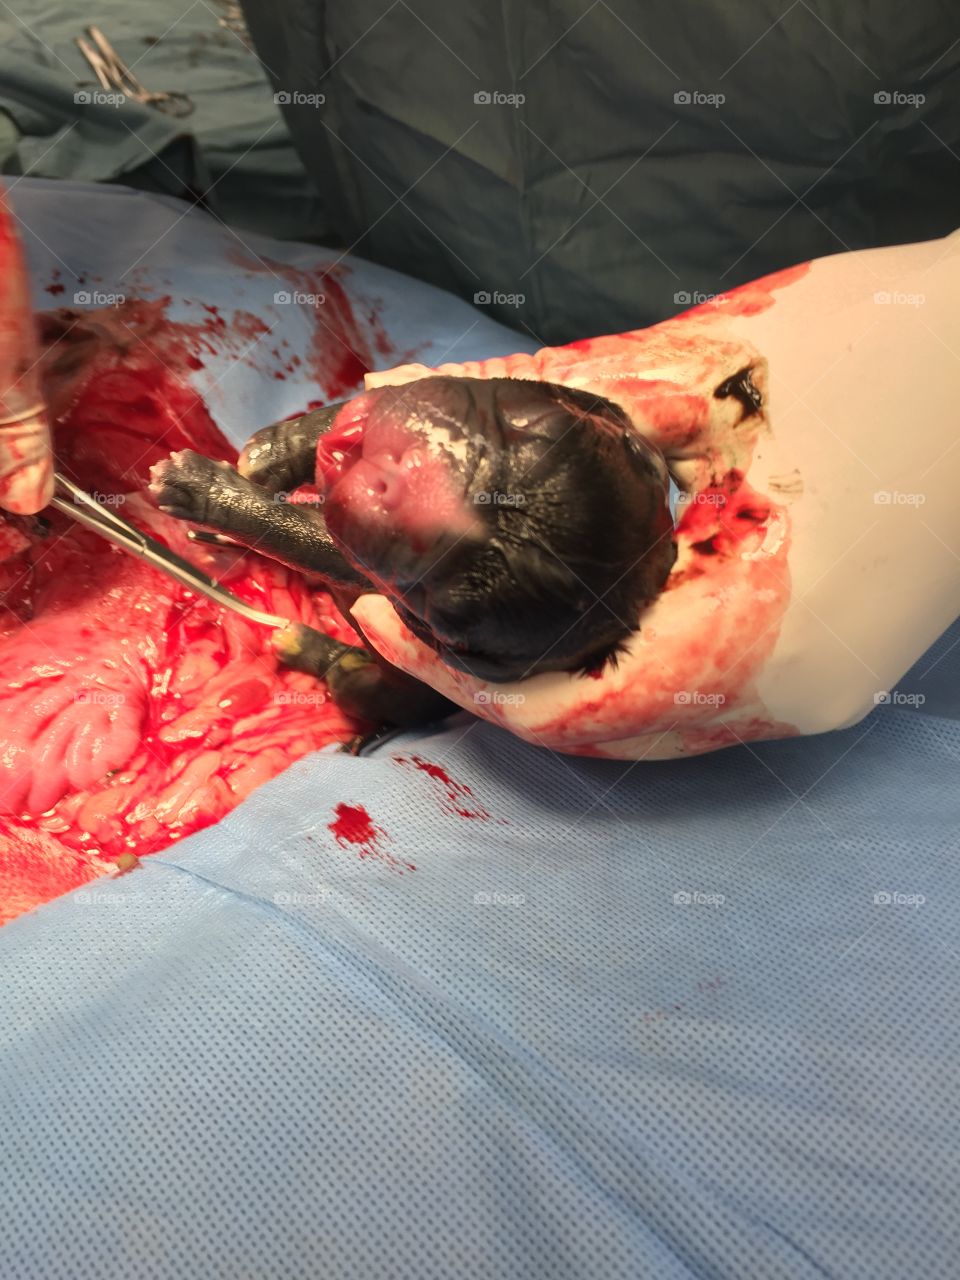 Caesarian section canine